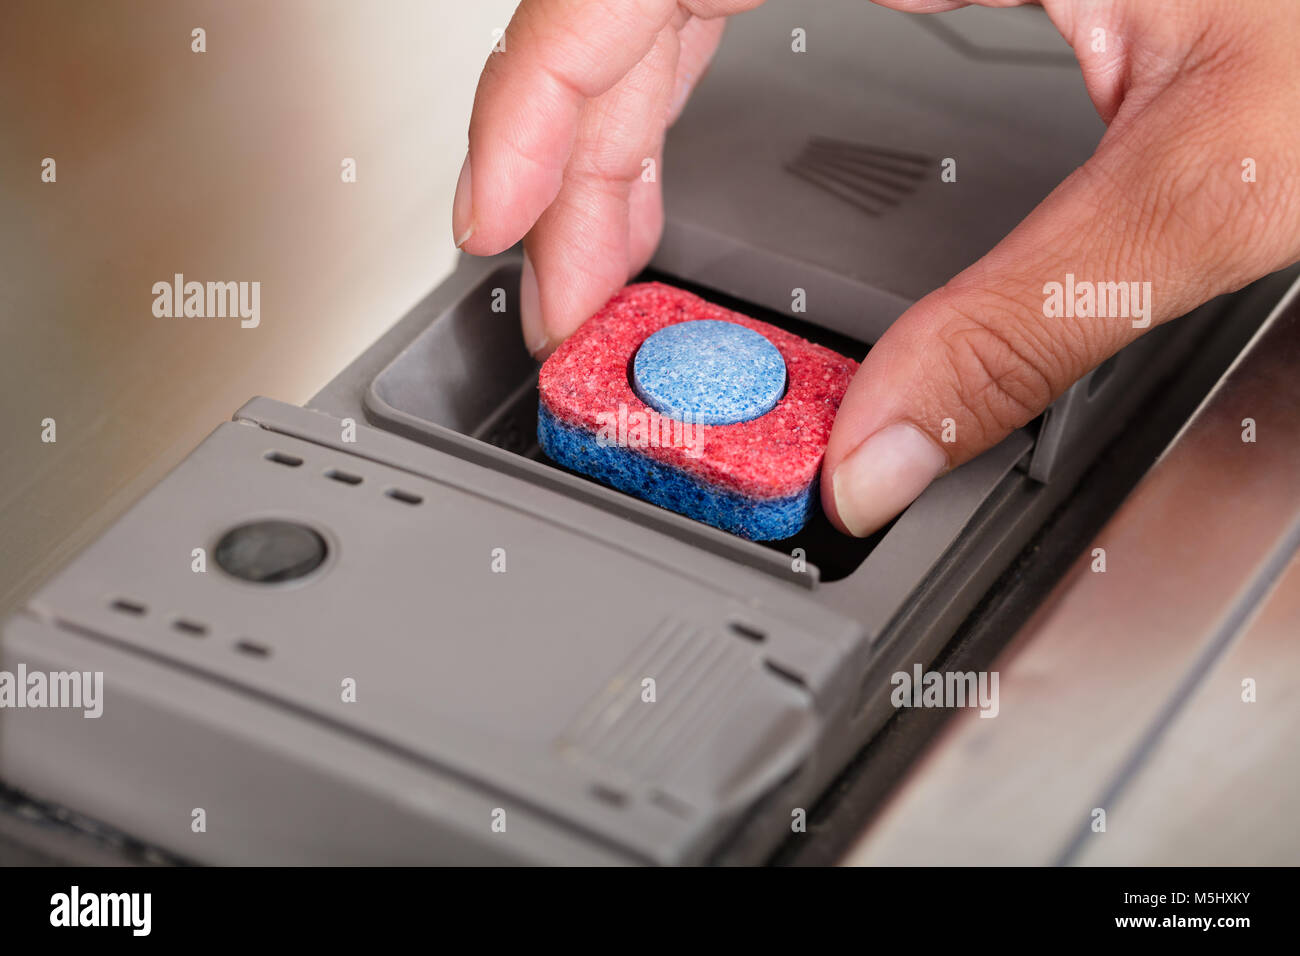 Close-up Of Person Hand Putting Tablet In Dishwasher Machine Stock Photo -  Alamy